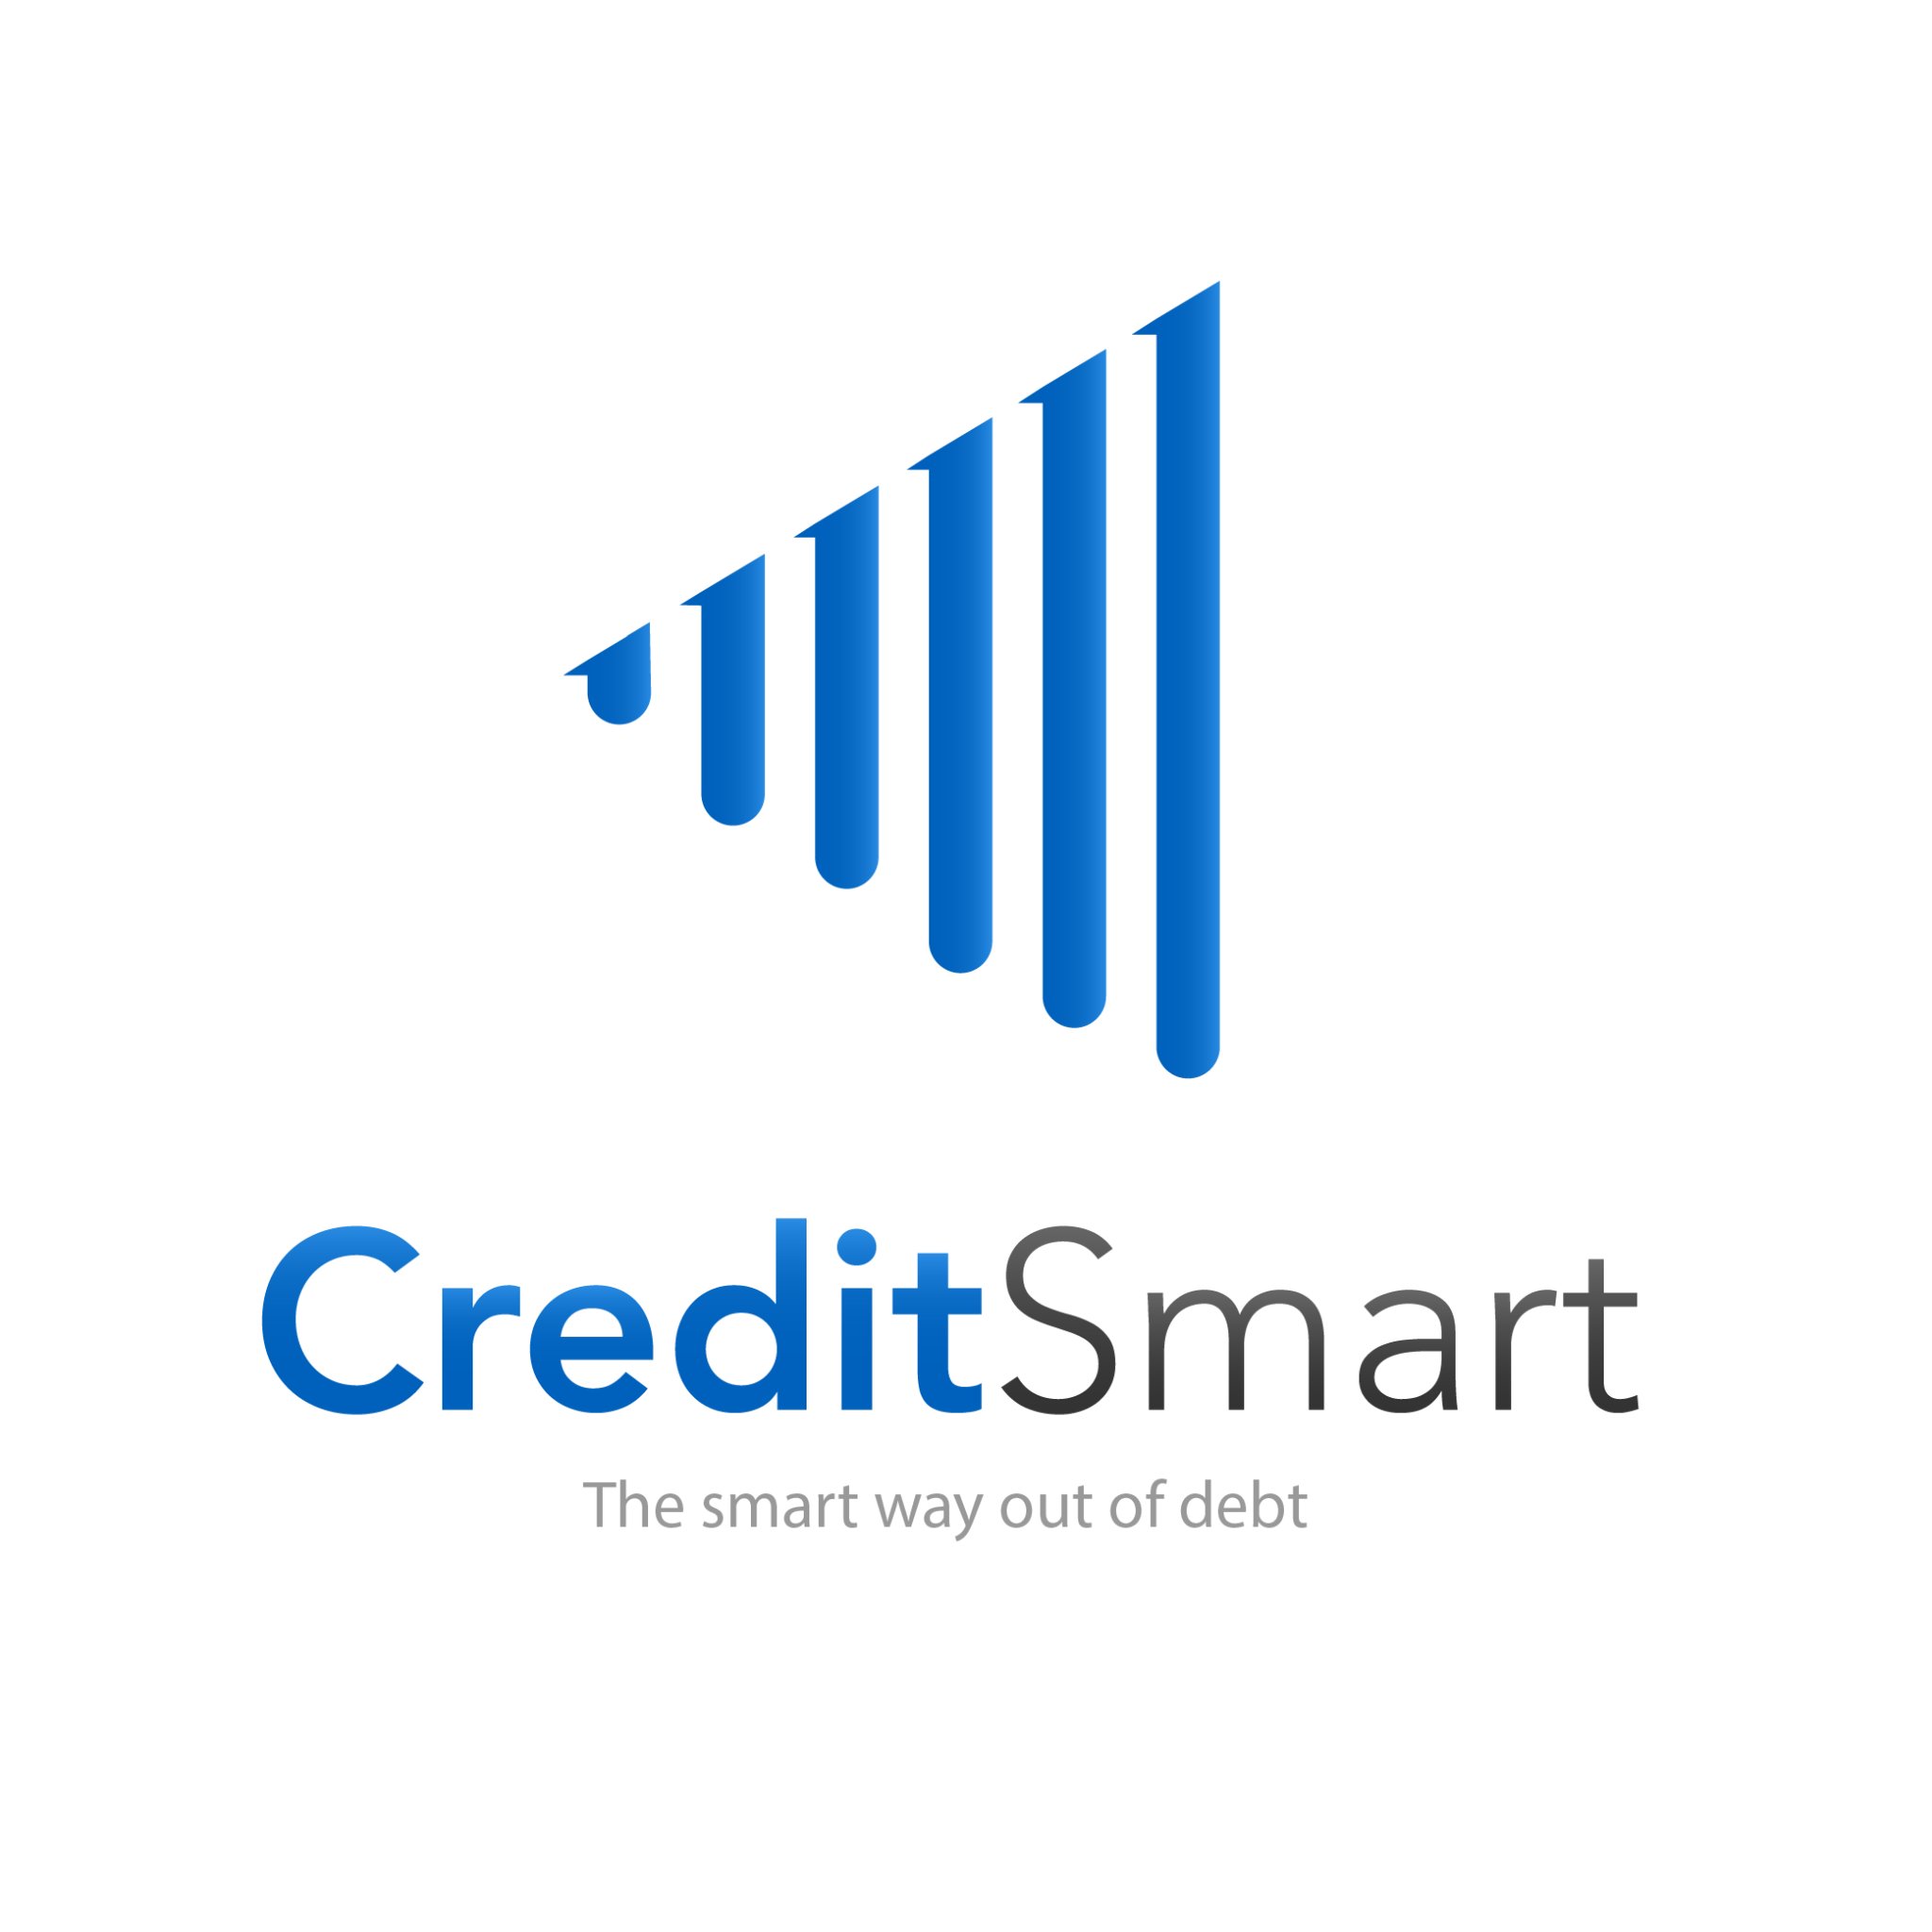 CreditSmart is a financial services provider focused on assisting consumers with every aspect of credit, debt and financial management within the CTDLC